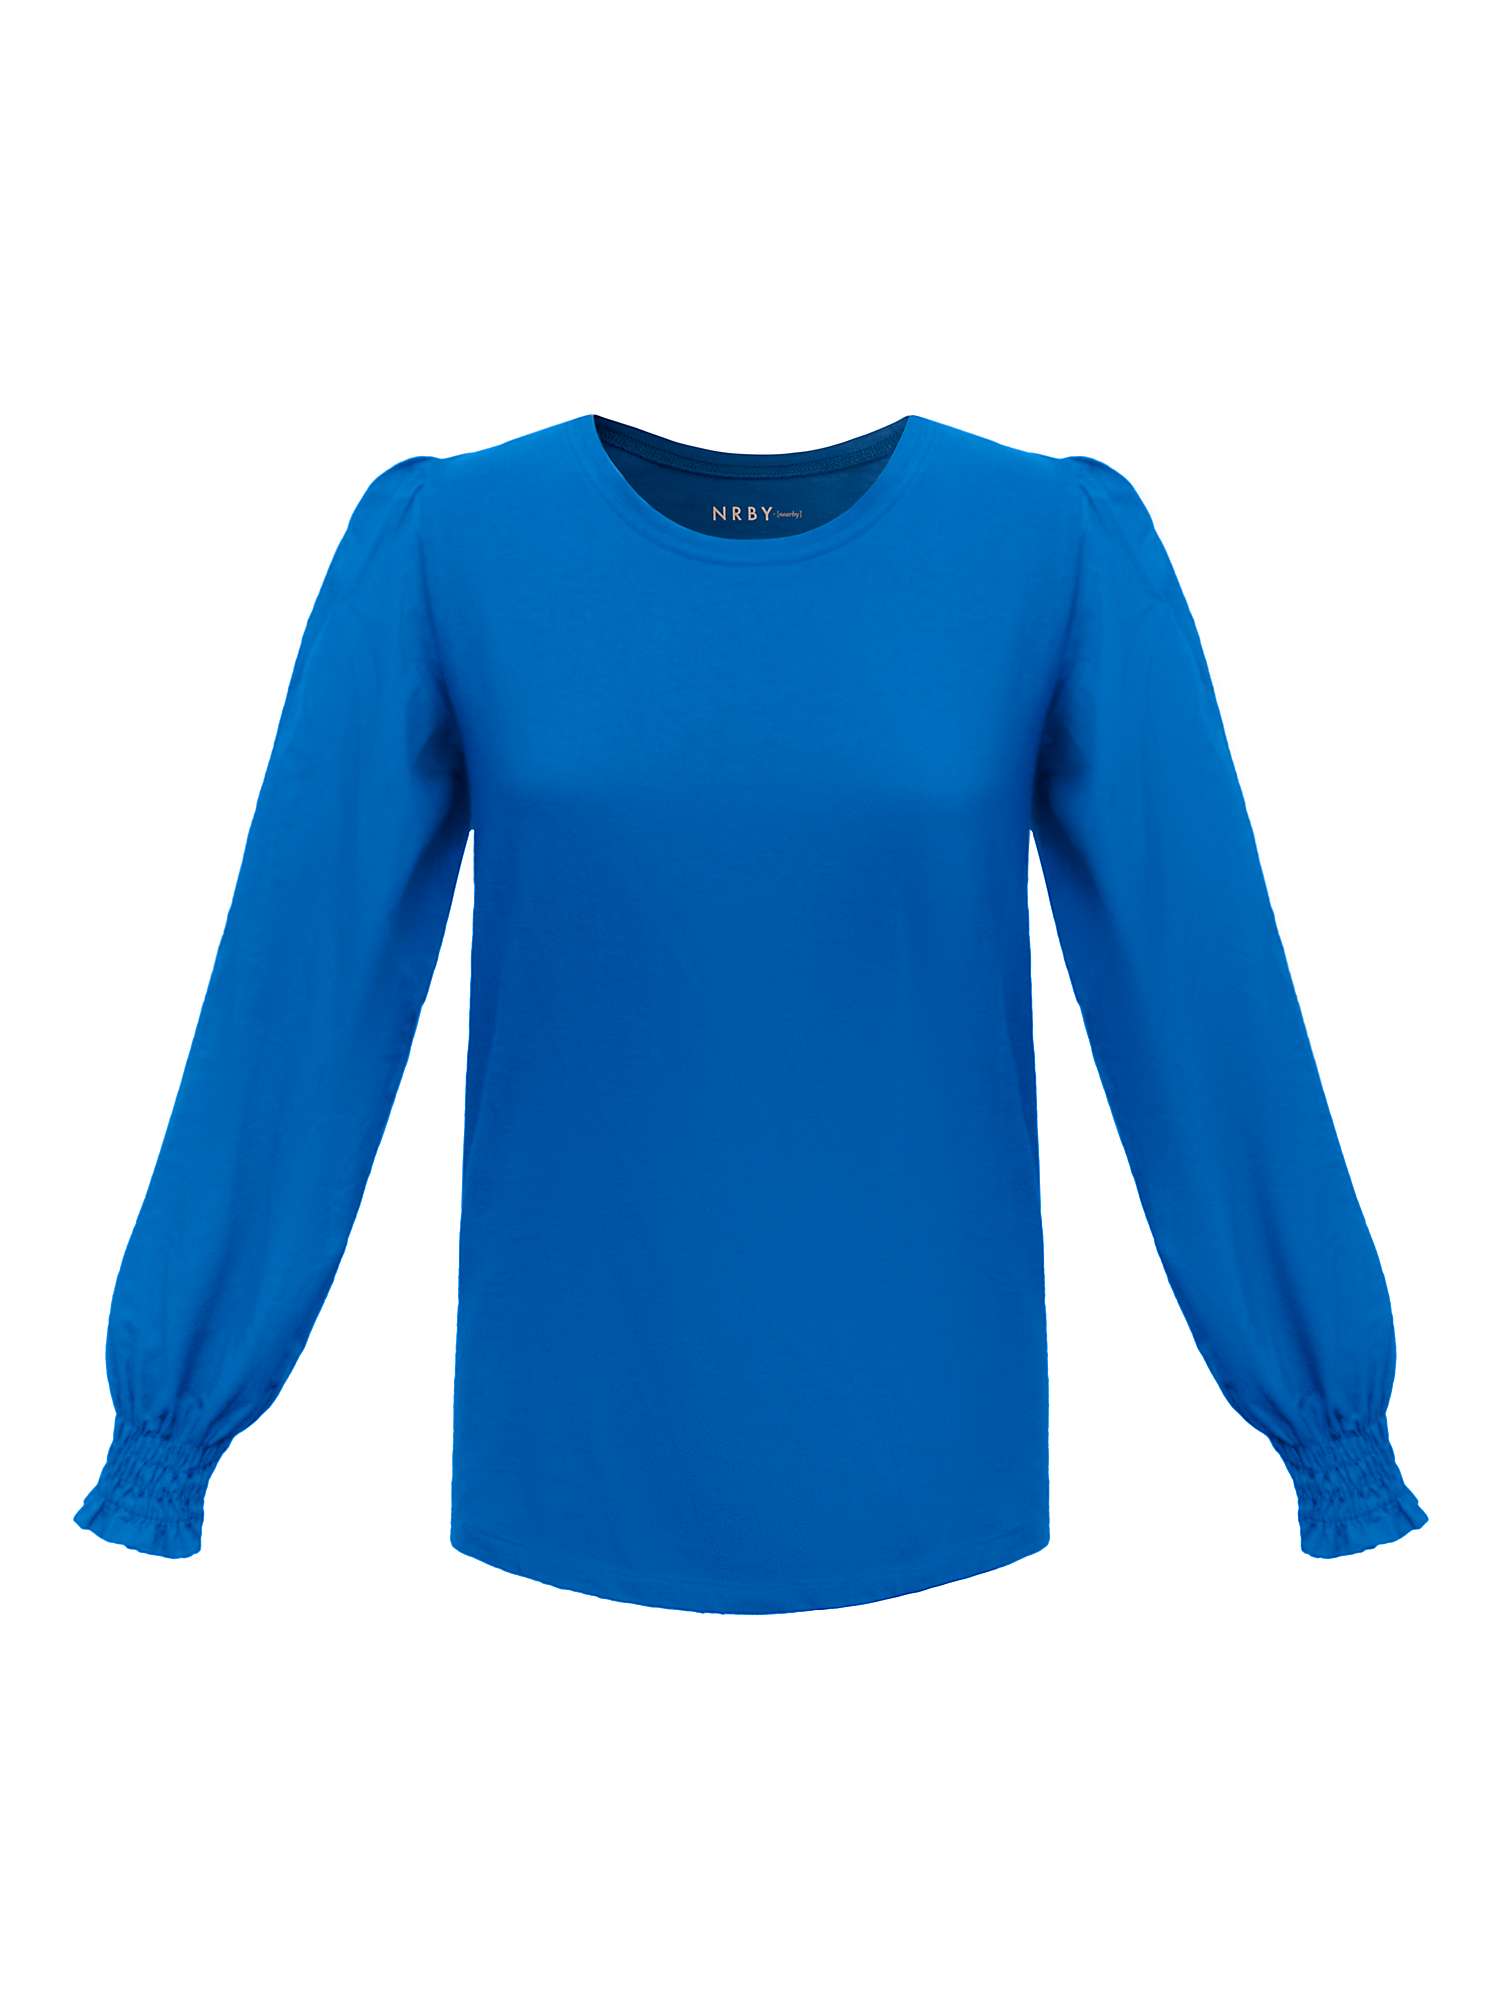 Buy NRBY Teddy Cotton Crew Neck Top Online at johnlewis.com